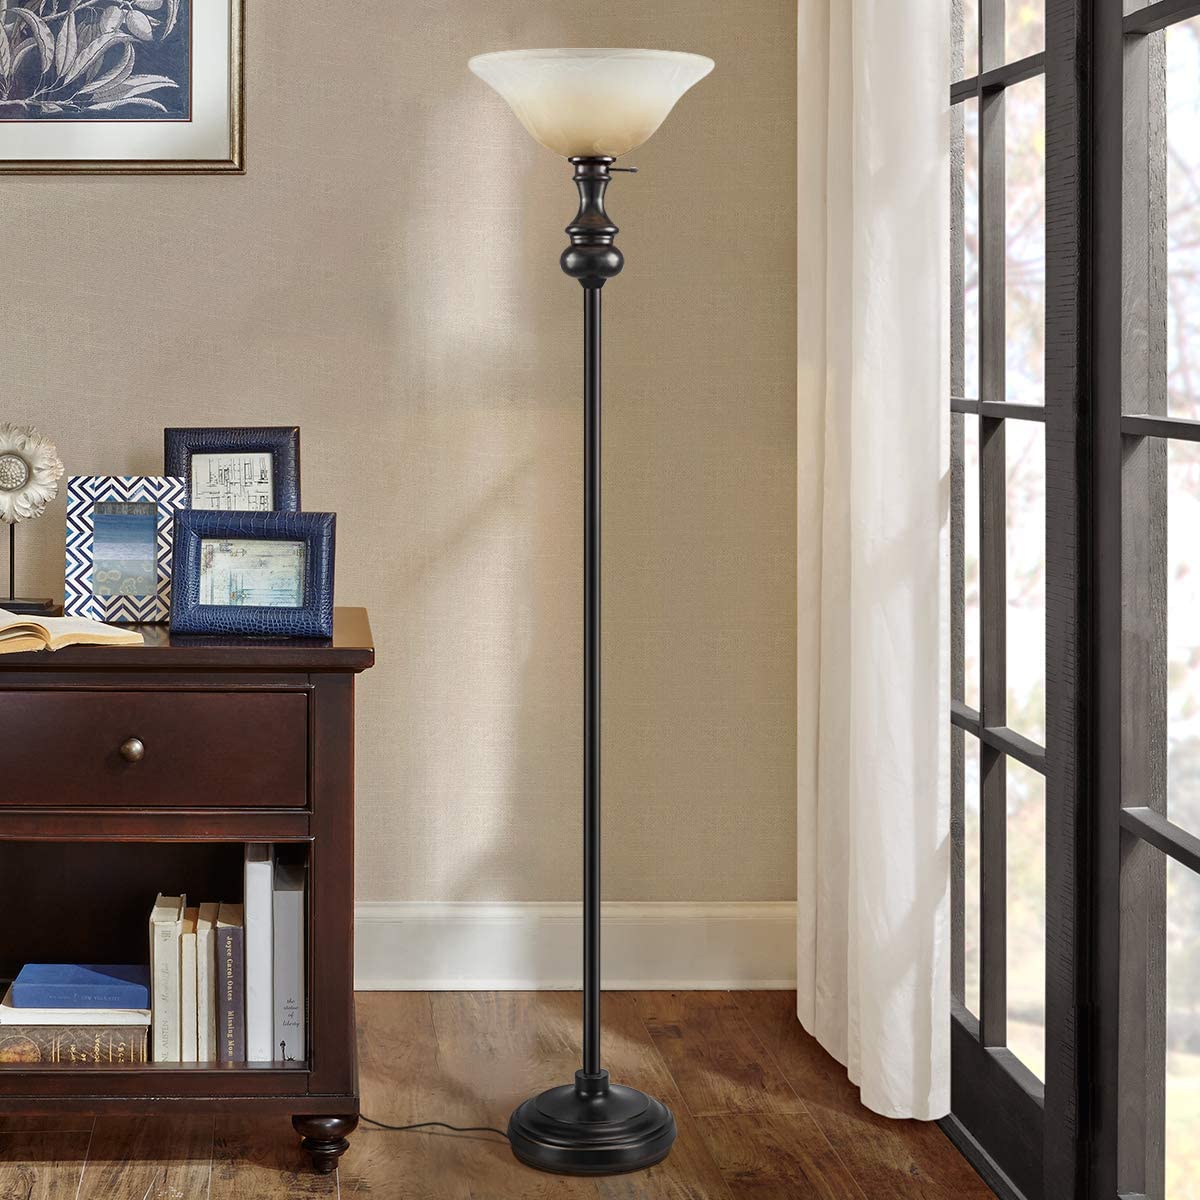 On each Modern Shirley Torchiere Floor Lamp. 15 Unique Artistic Floor Lamps to Light Your Bedroom - 7